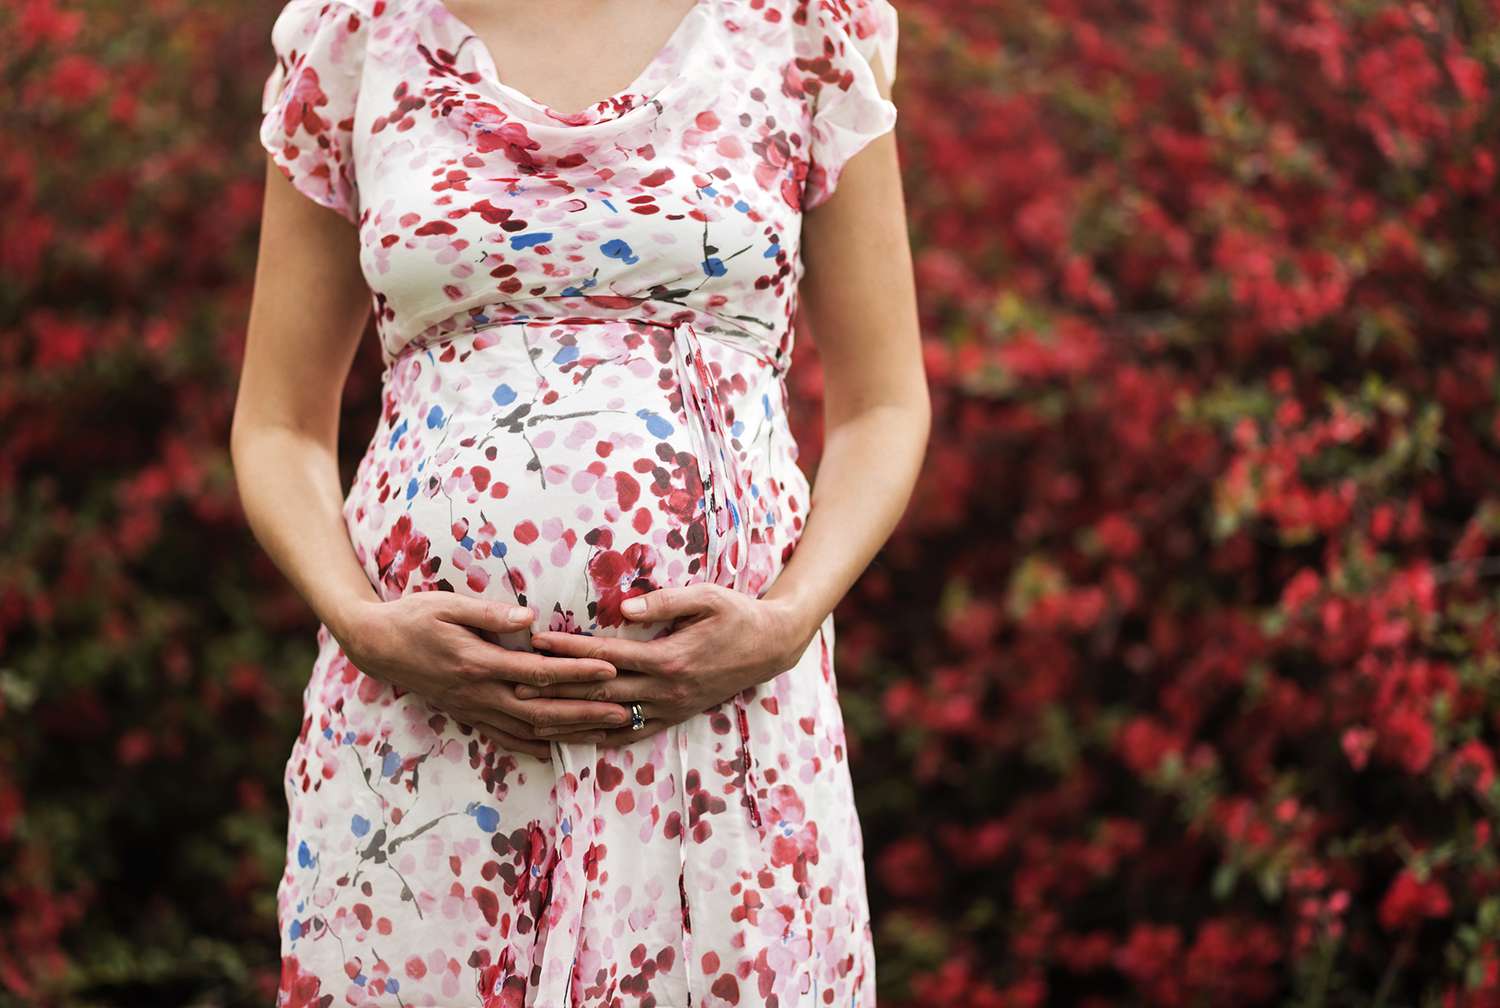 Pregnant woman in floral dress